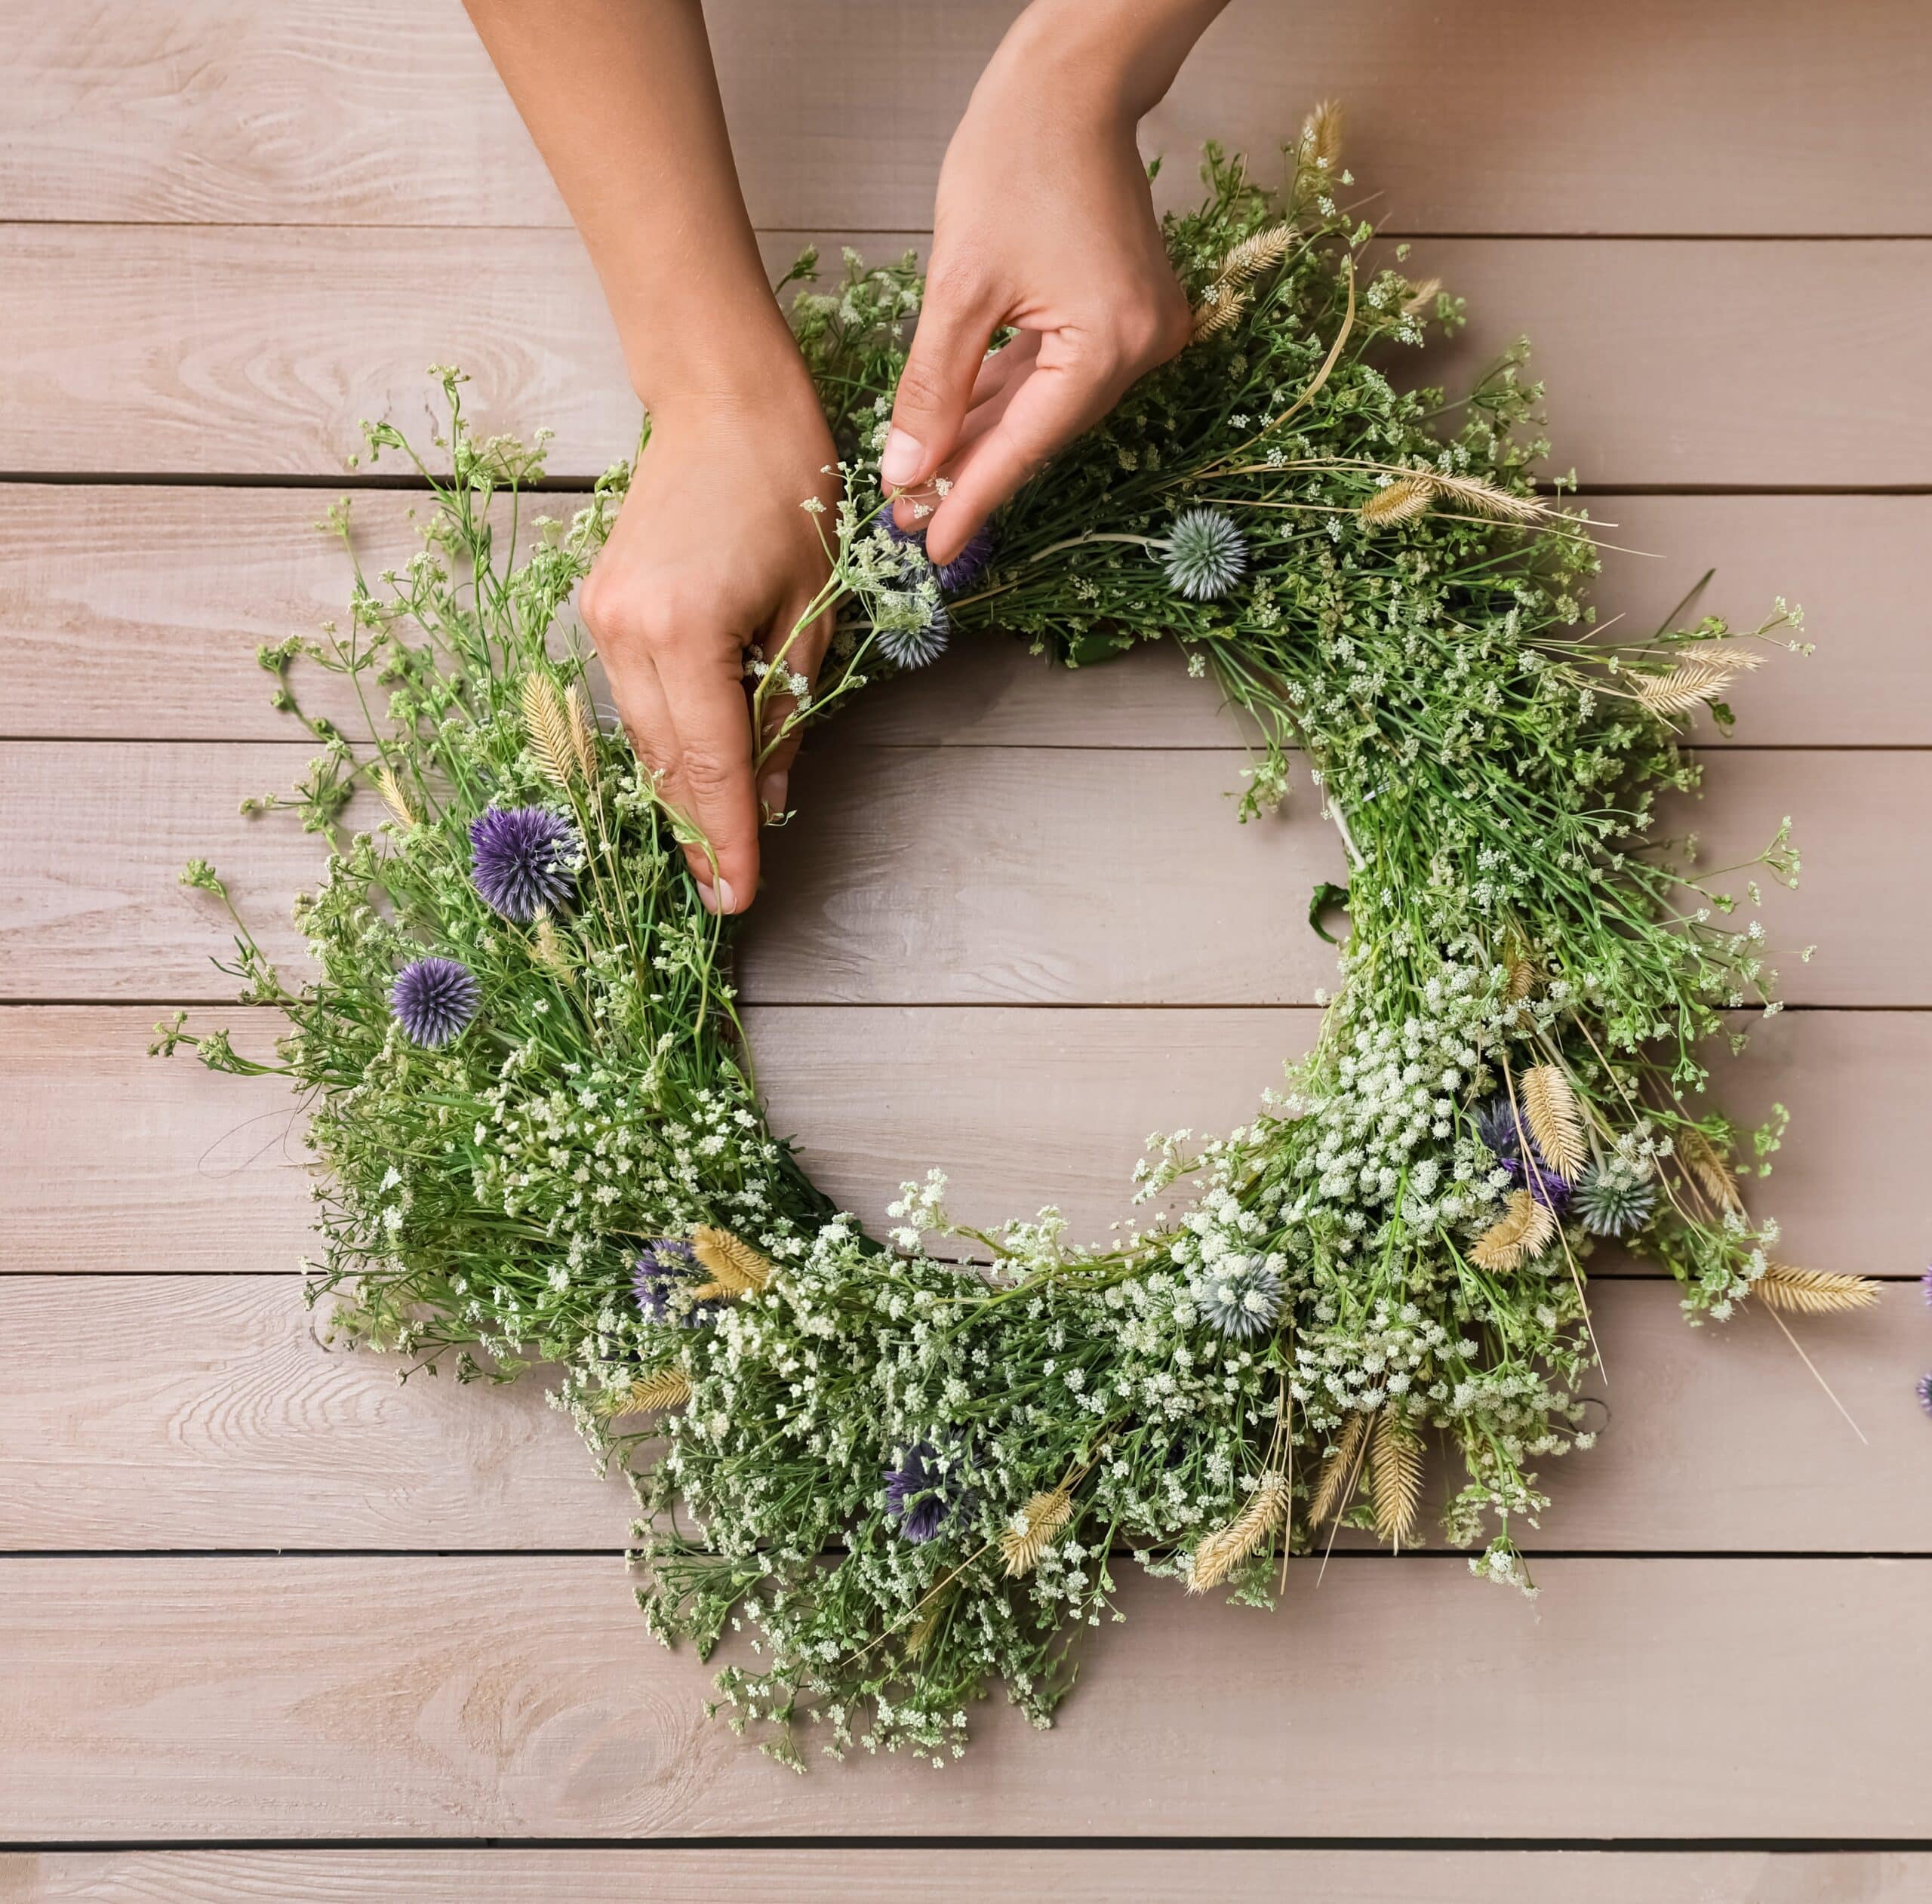 stock photo of a wreath of spring flowers being made on a wooden bench just the hands coming down from the top.